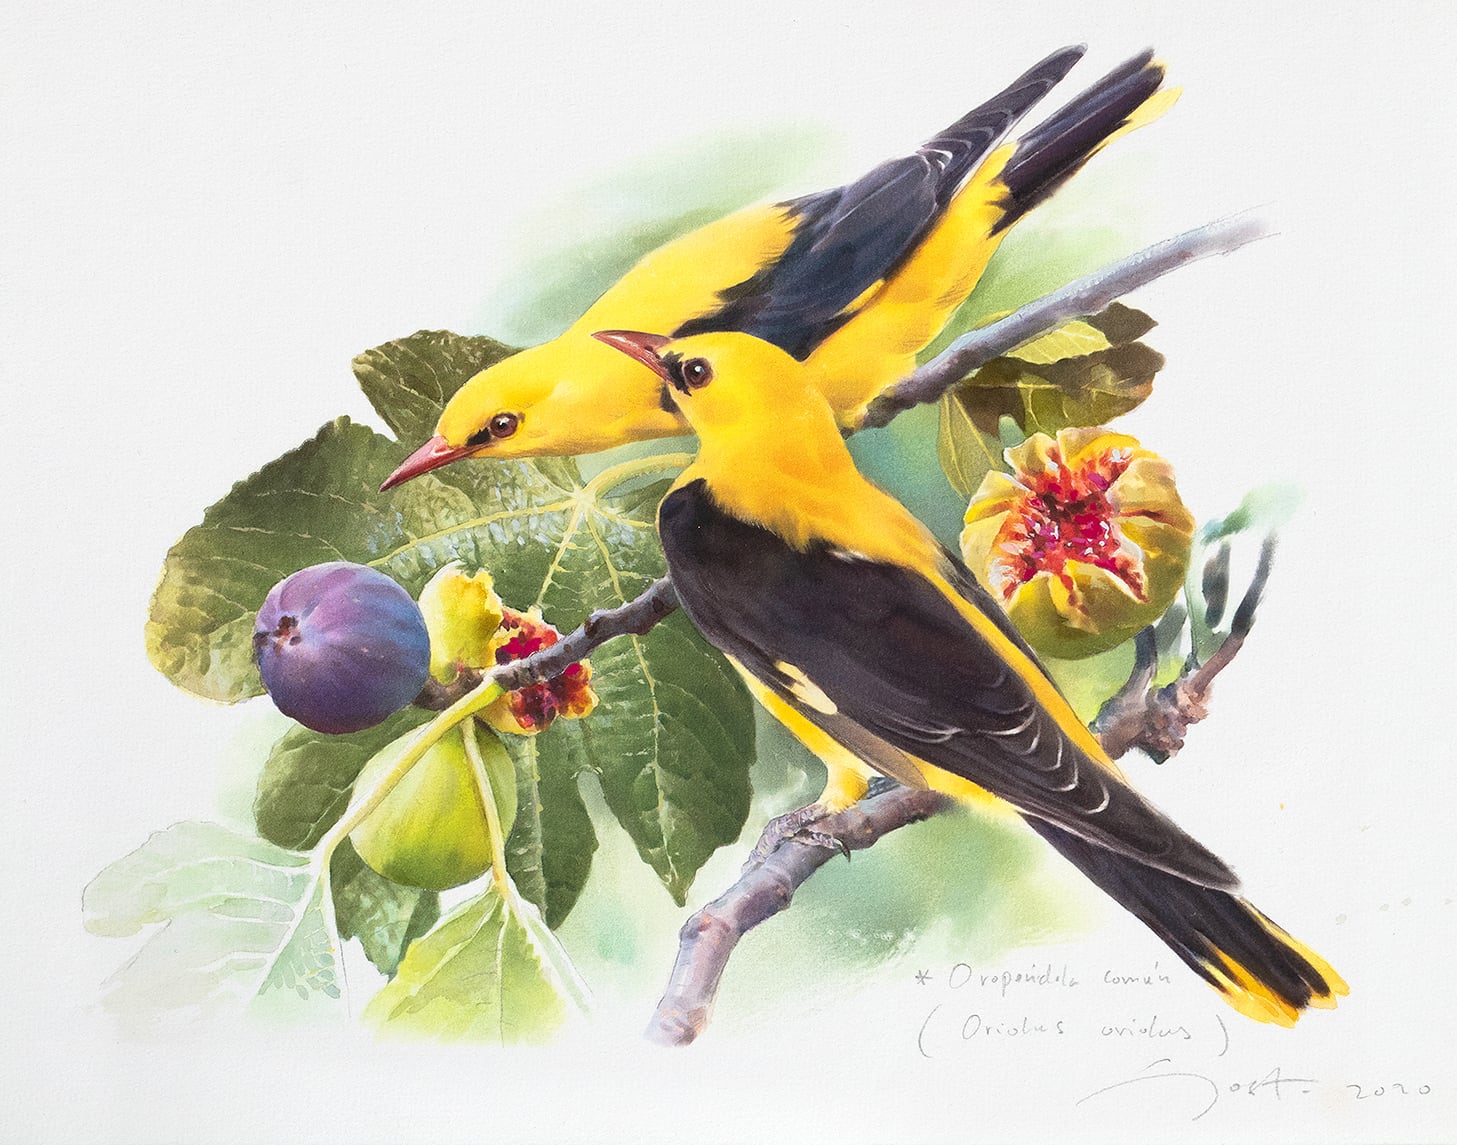 Watercolour of Golden oriole eating figs